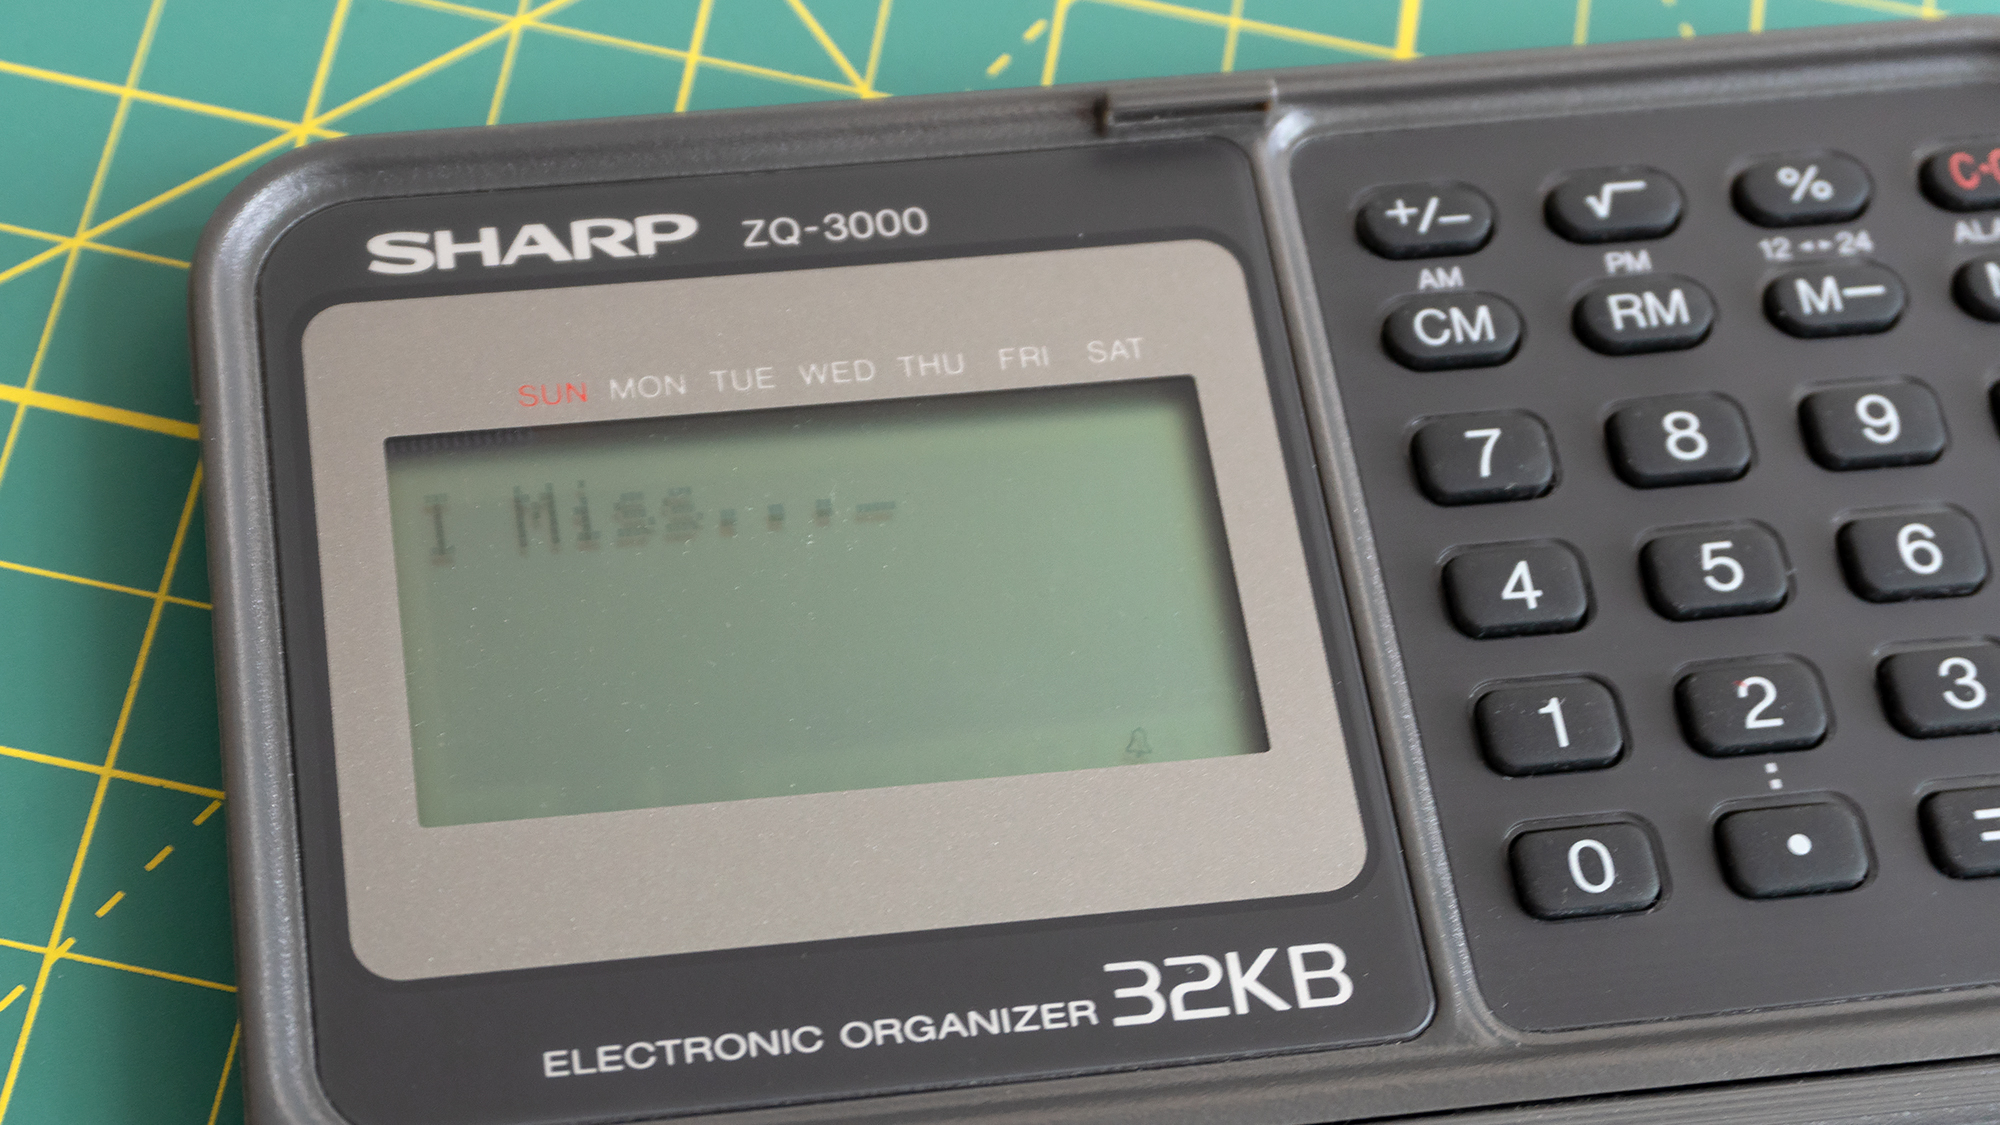 With screen resolutions measured in how many lines of text they could display at one time, electronic organisers seem impossibly outdated today. (Photo: Andrew Liszewski - Gizmodo)